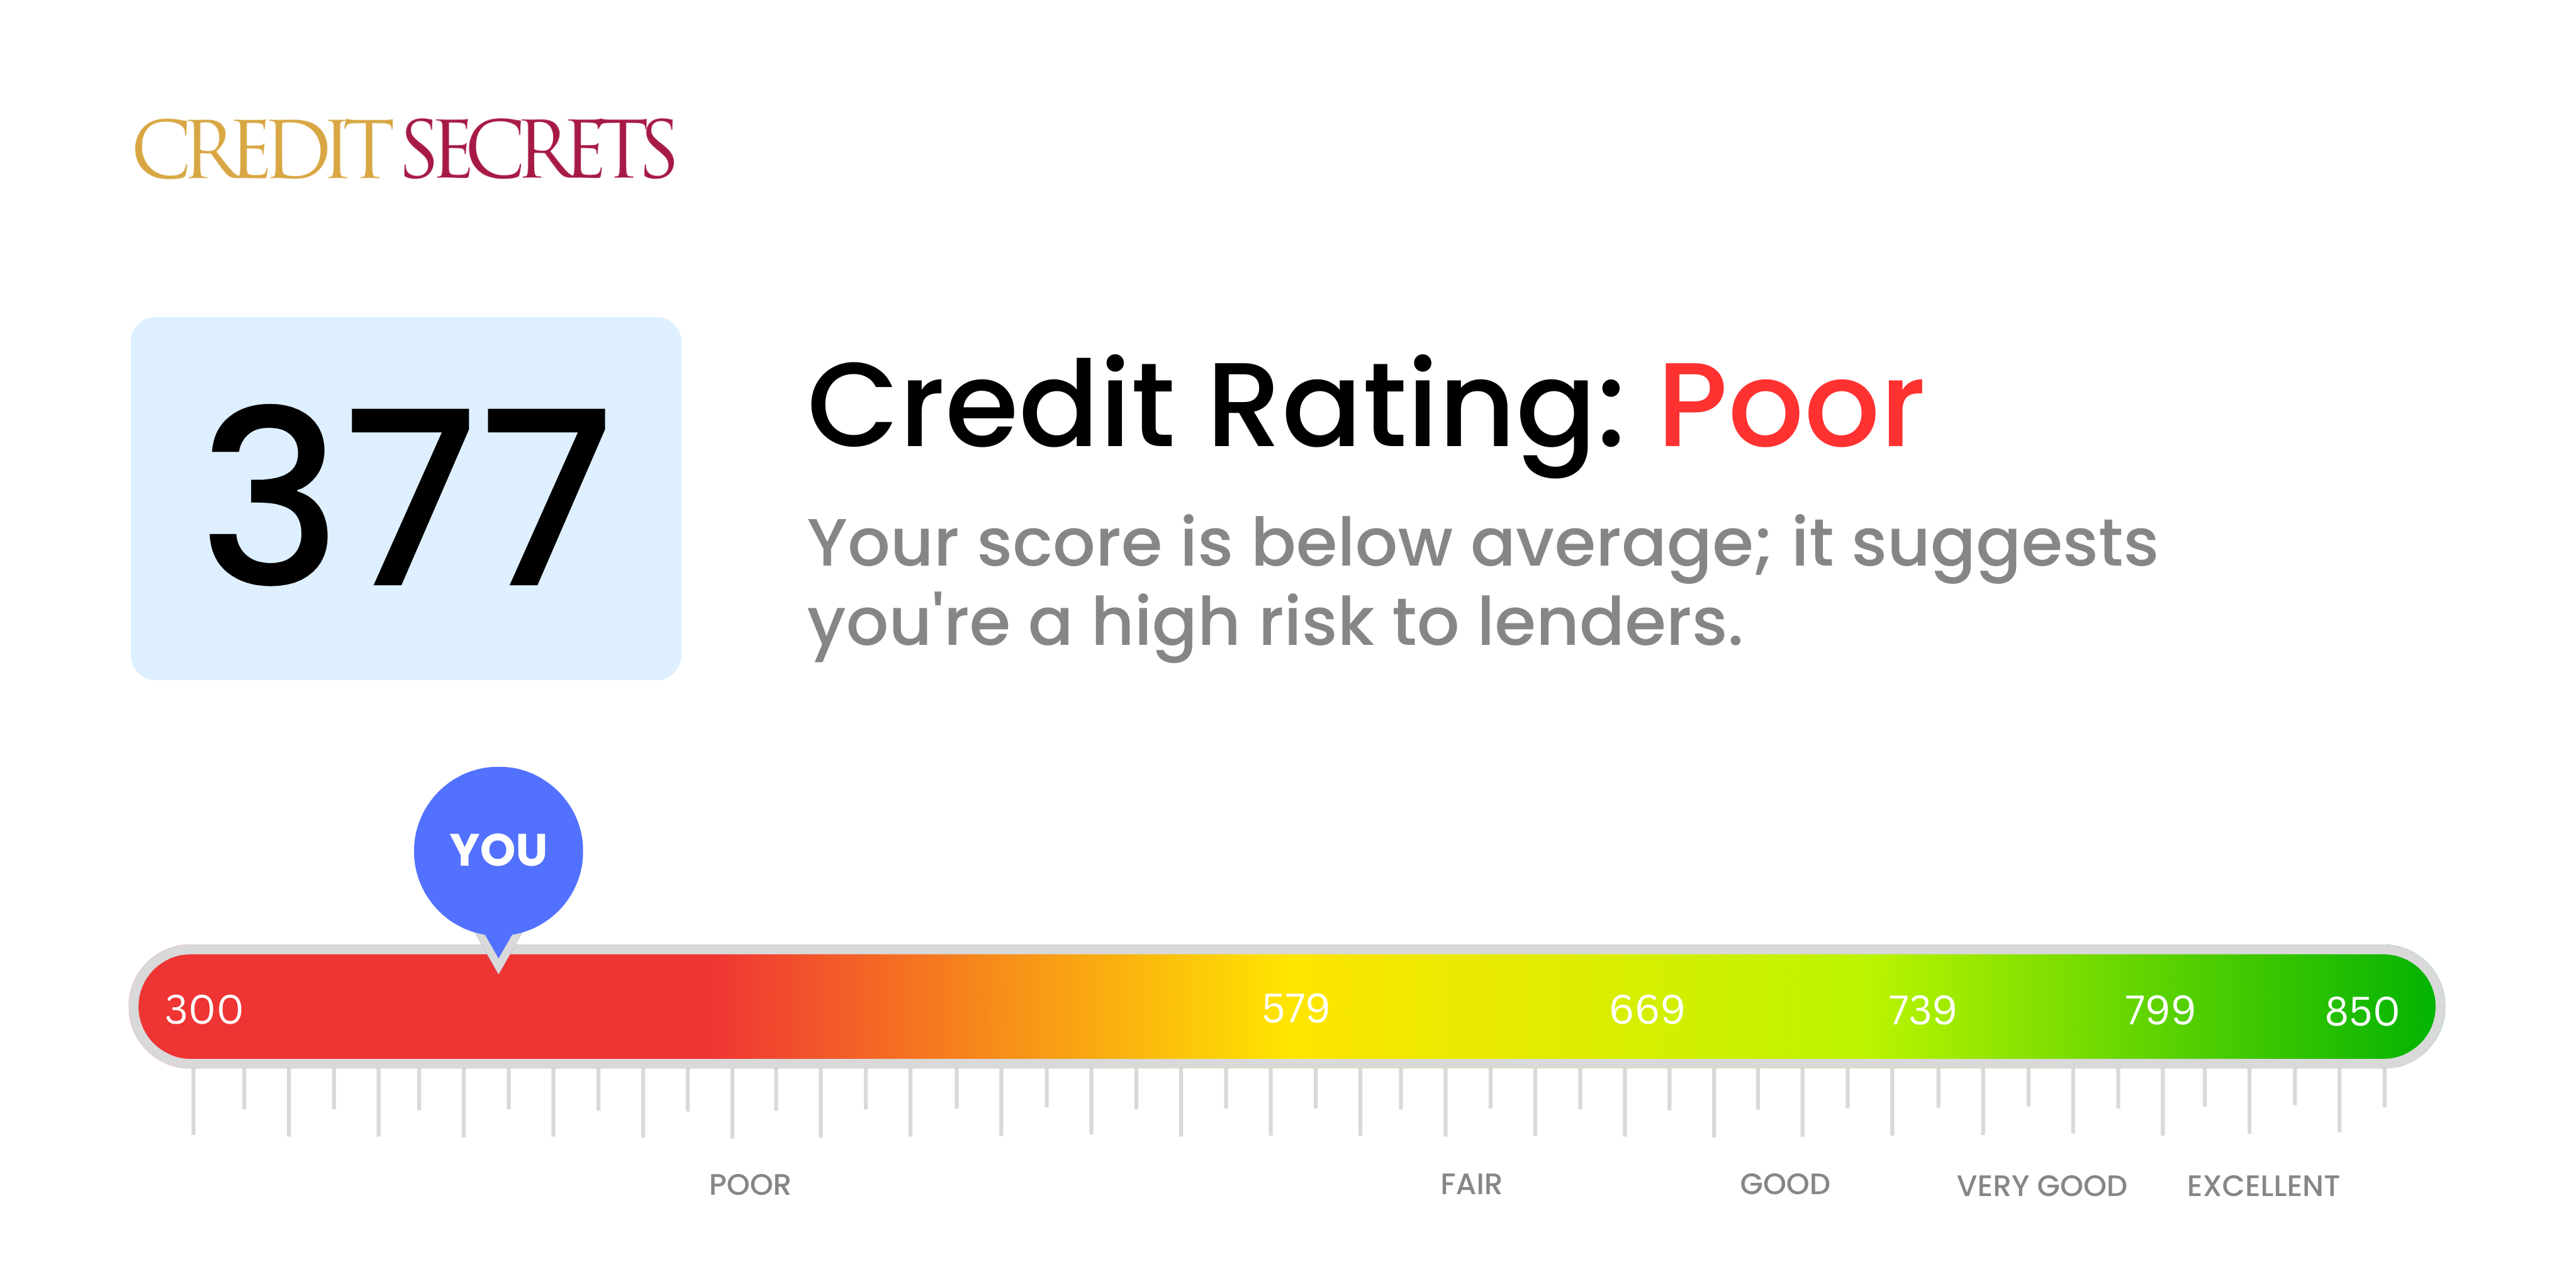 Is 377 a good credit score?